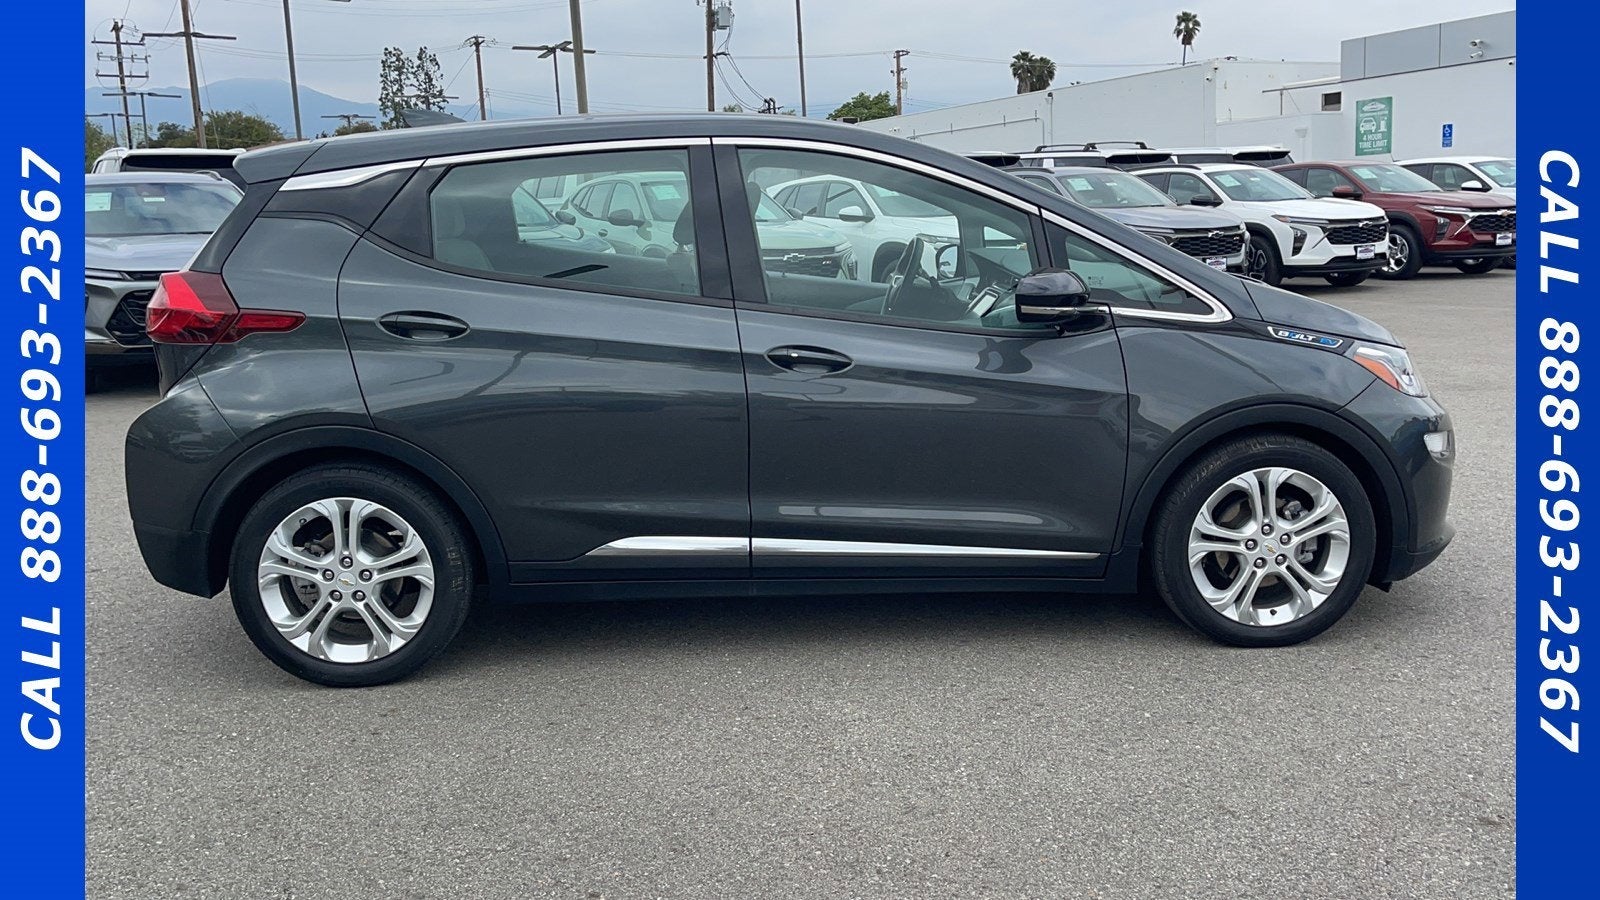 Used 2021 Chevrolet Bolt EV LT with VIN 1G1FY6S03M4100085 for sale in Upland, CA